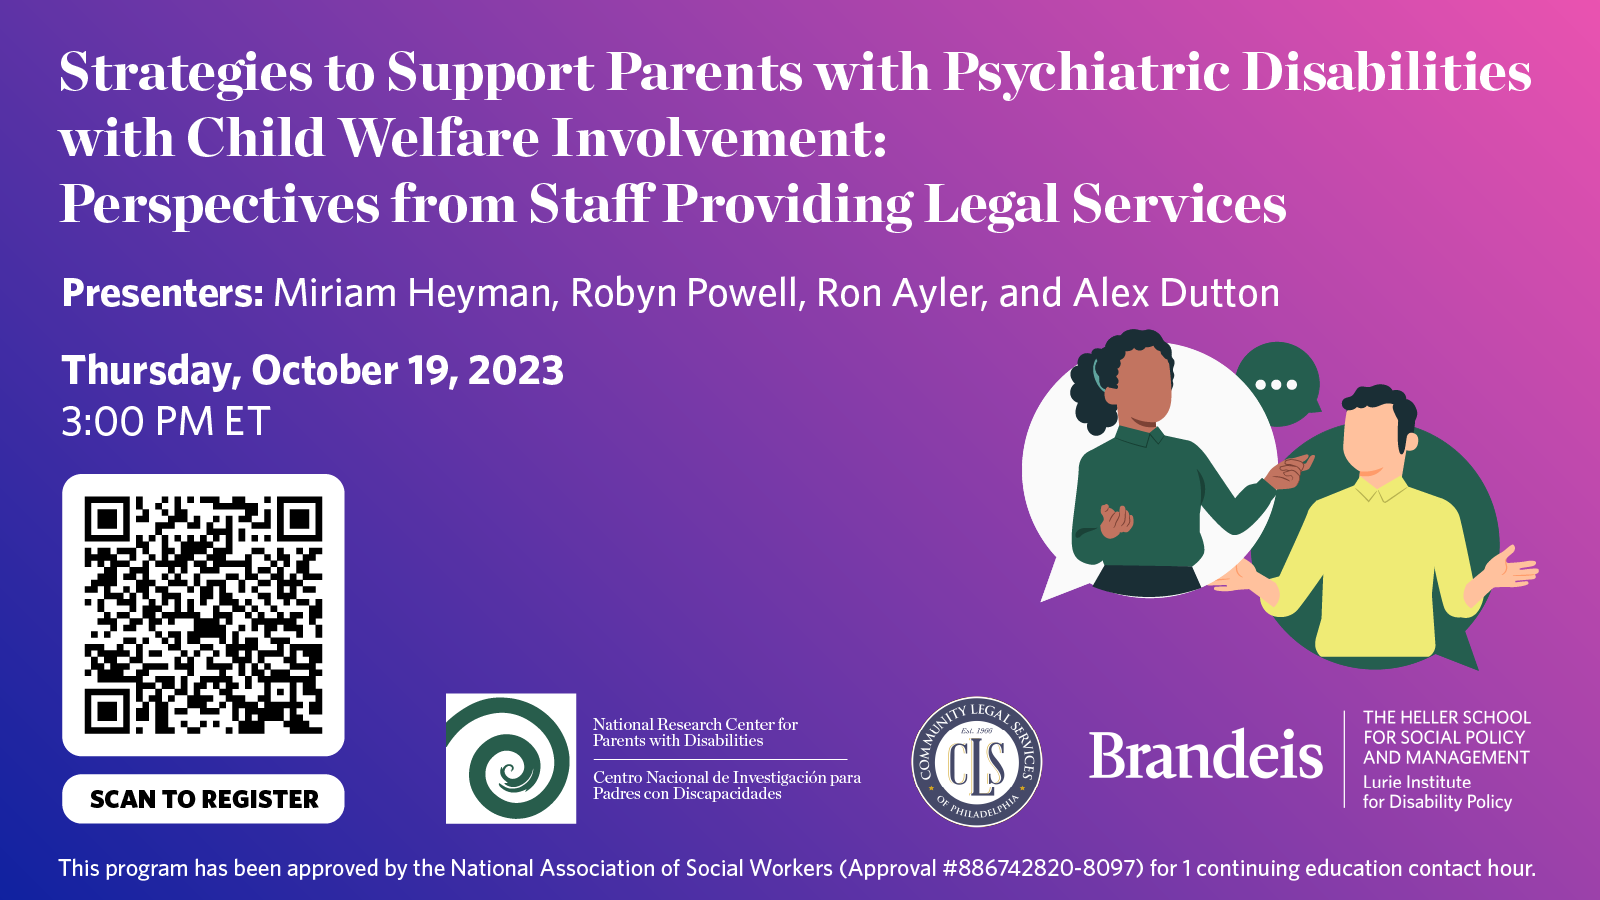 Strategies to Support Parents with Psychiatric Disabilities  with Child Welfare Involvement:  Perspectives from Staff Providing Legal Services. Presenters: Miriam Heyman, Robyn Powell, Ron Ayler, and Alex Dutton. Thursday, October 19, 2023 3:00 PM ET. This program has been approved by the National Association of Social Workers (Approval #886742820-8097) for 1 continuing education contact hour. National Research Center for Parents with Disabilities. Community Legal Services of Philadelphia. Brandeis, The Heller School for Social Policy and Management, Lurie Institute for Disability Policy.